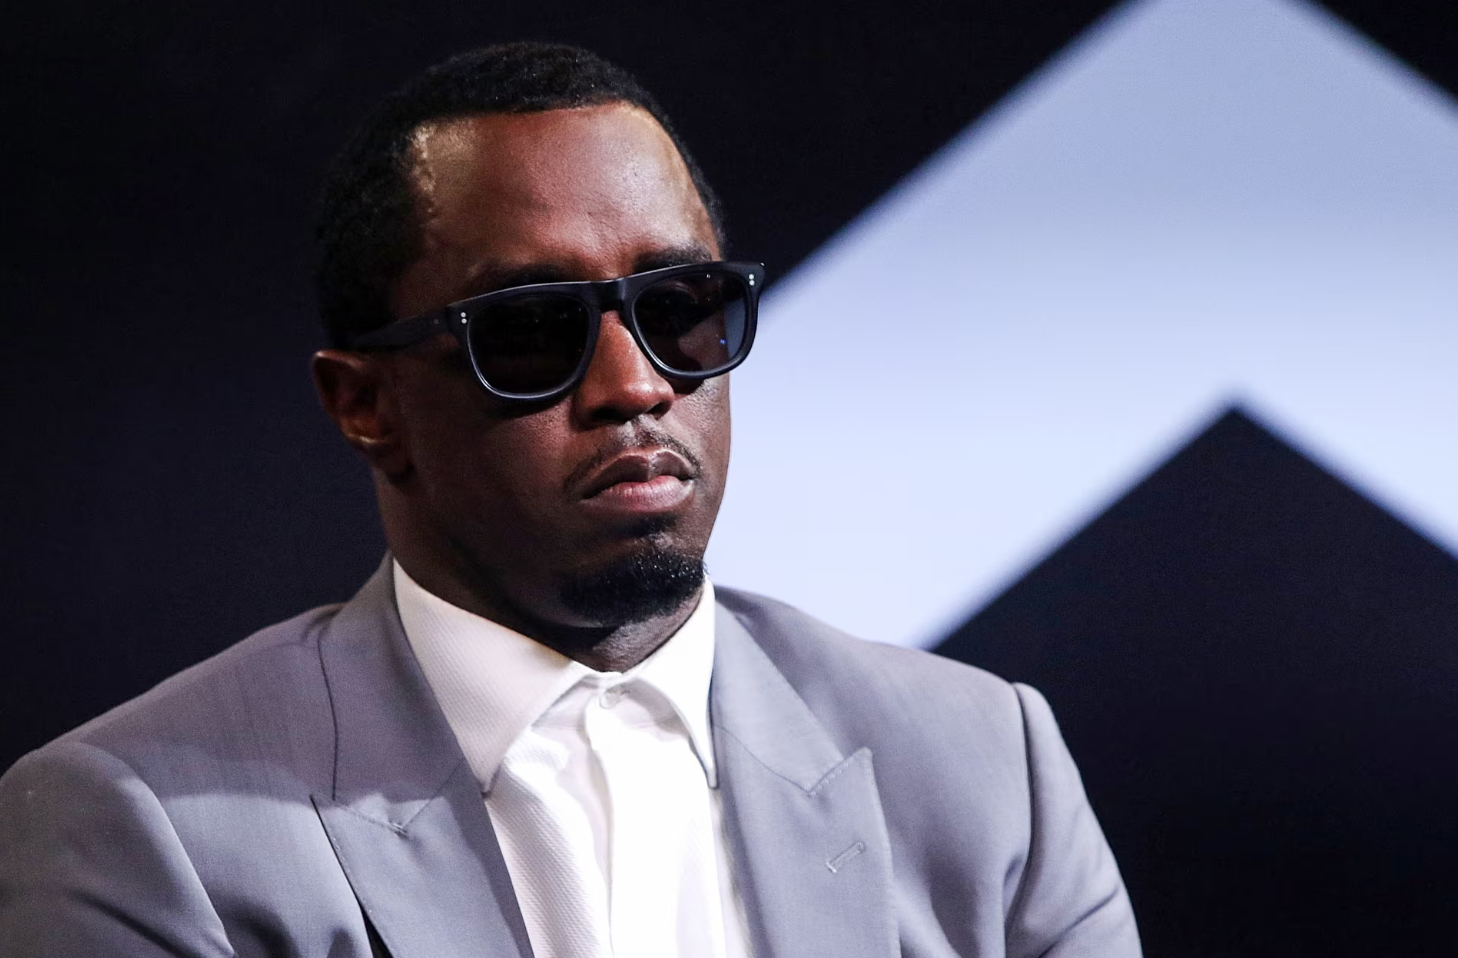 Sean ‘Diddy’ Combs in New York in 2016. Photograph: Laura Cavanaugh/Getty Images